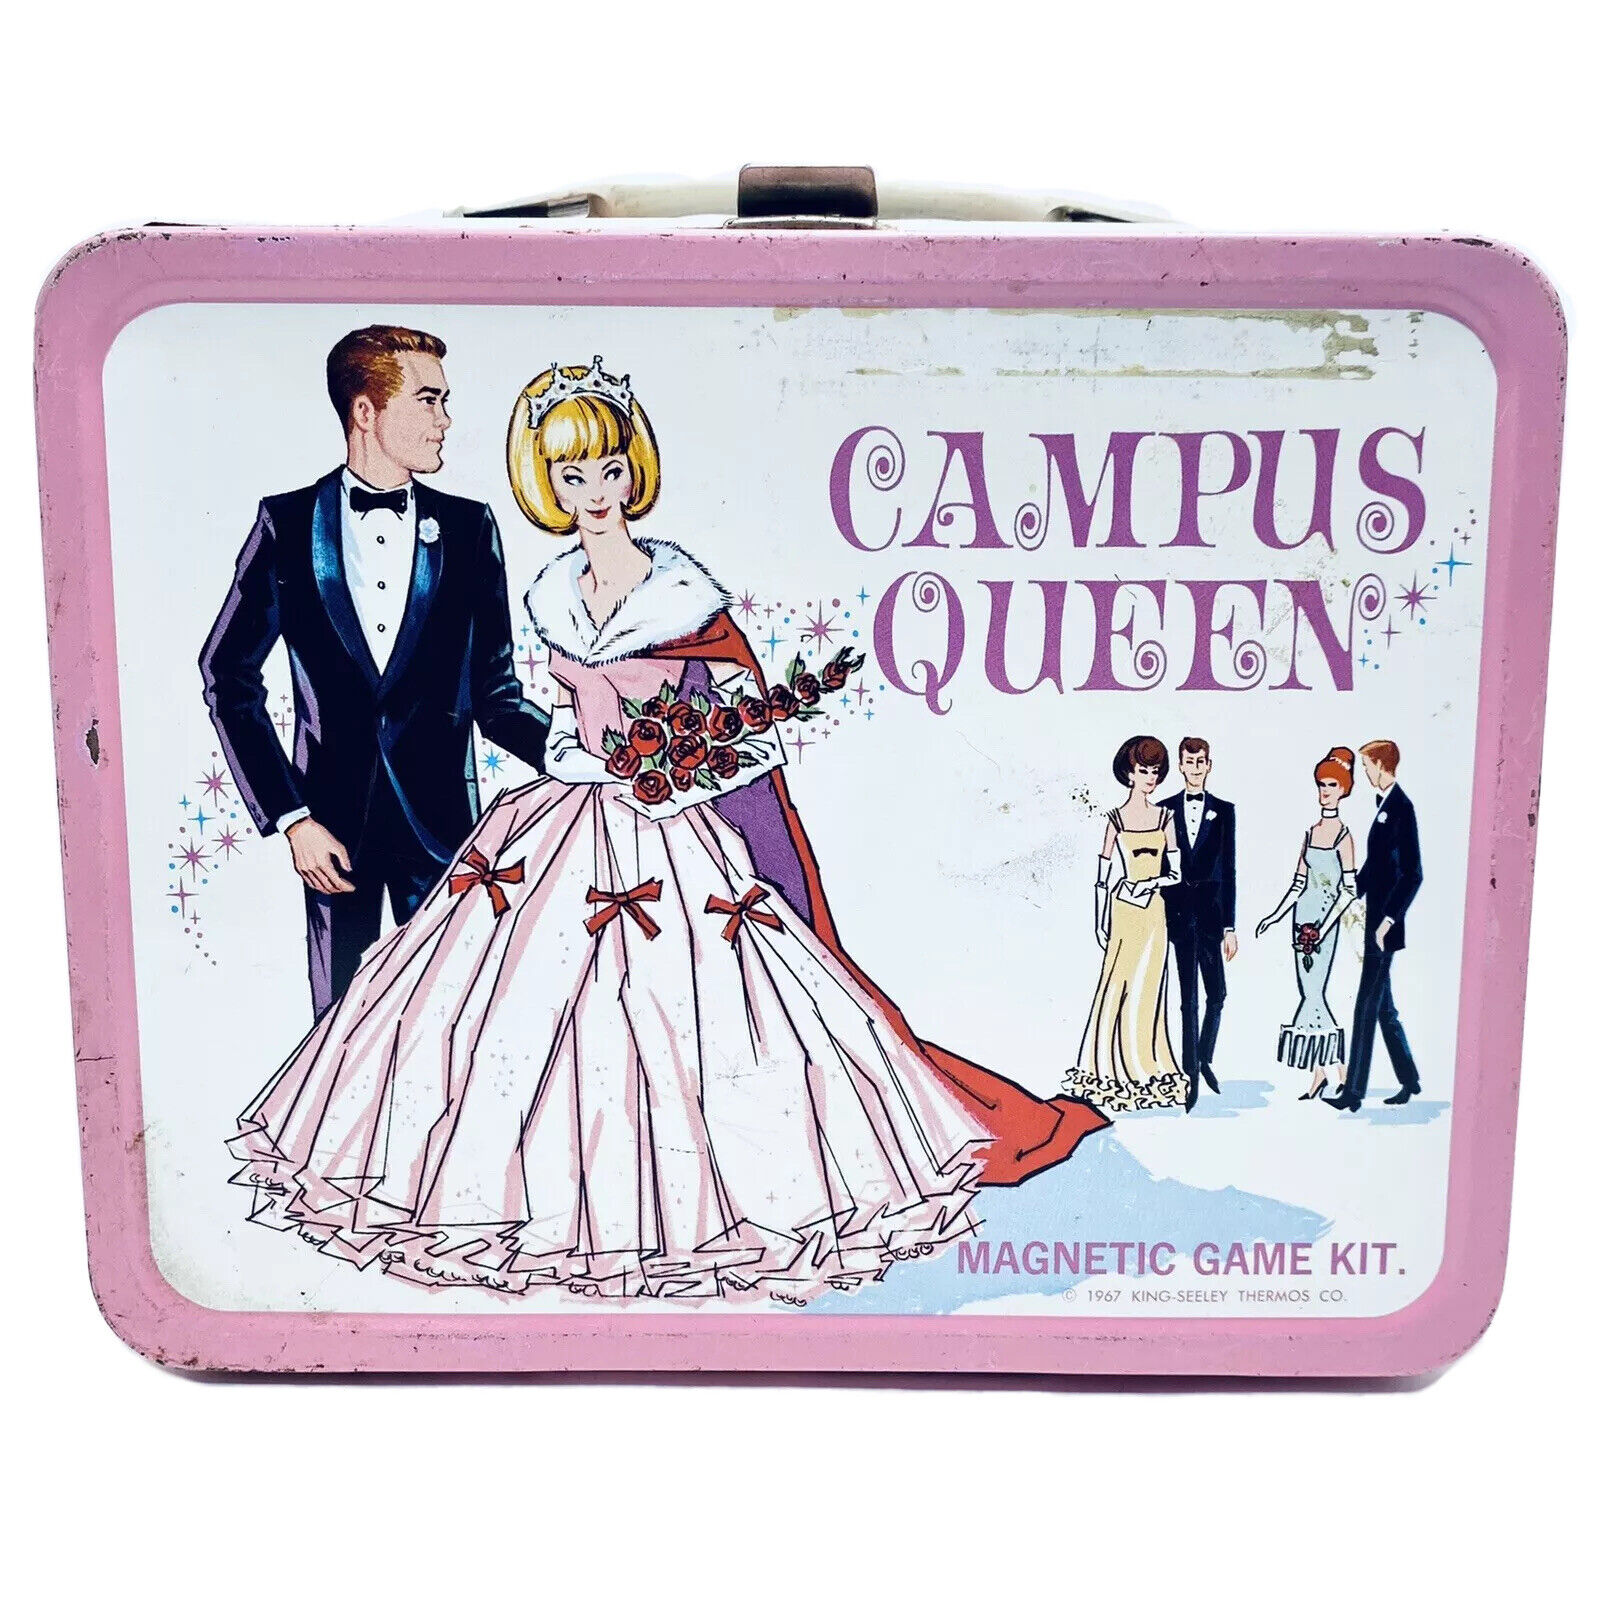 Vtg 1967 CAMPUS QUEEN Metal Lunch Box King-Seely Thermos Co. NO GAME/NO THERMOS